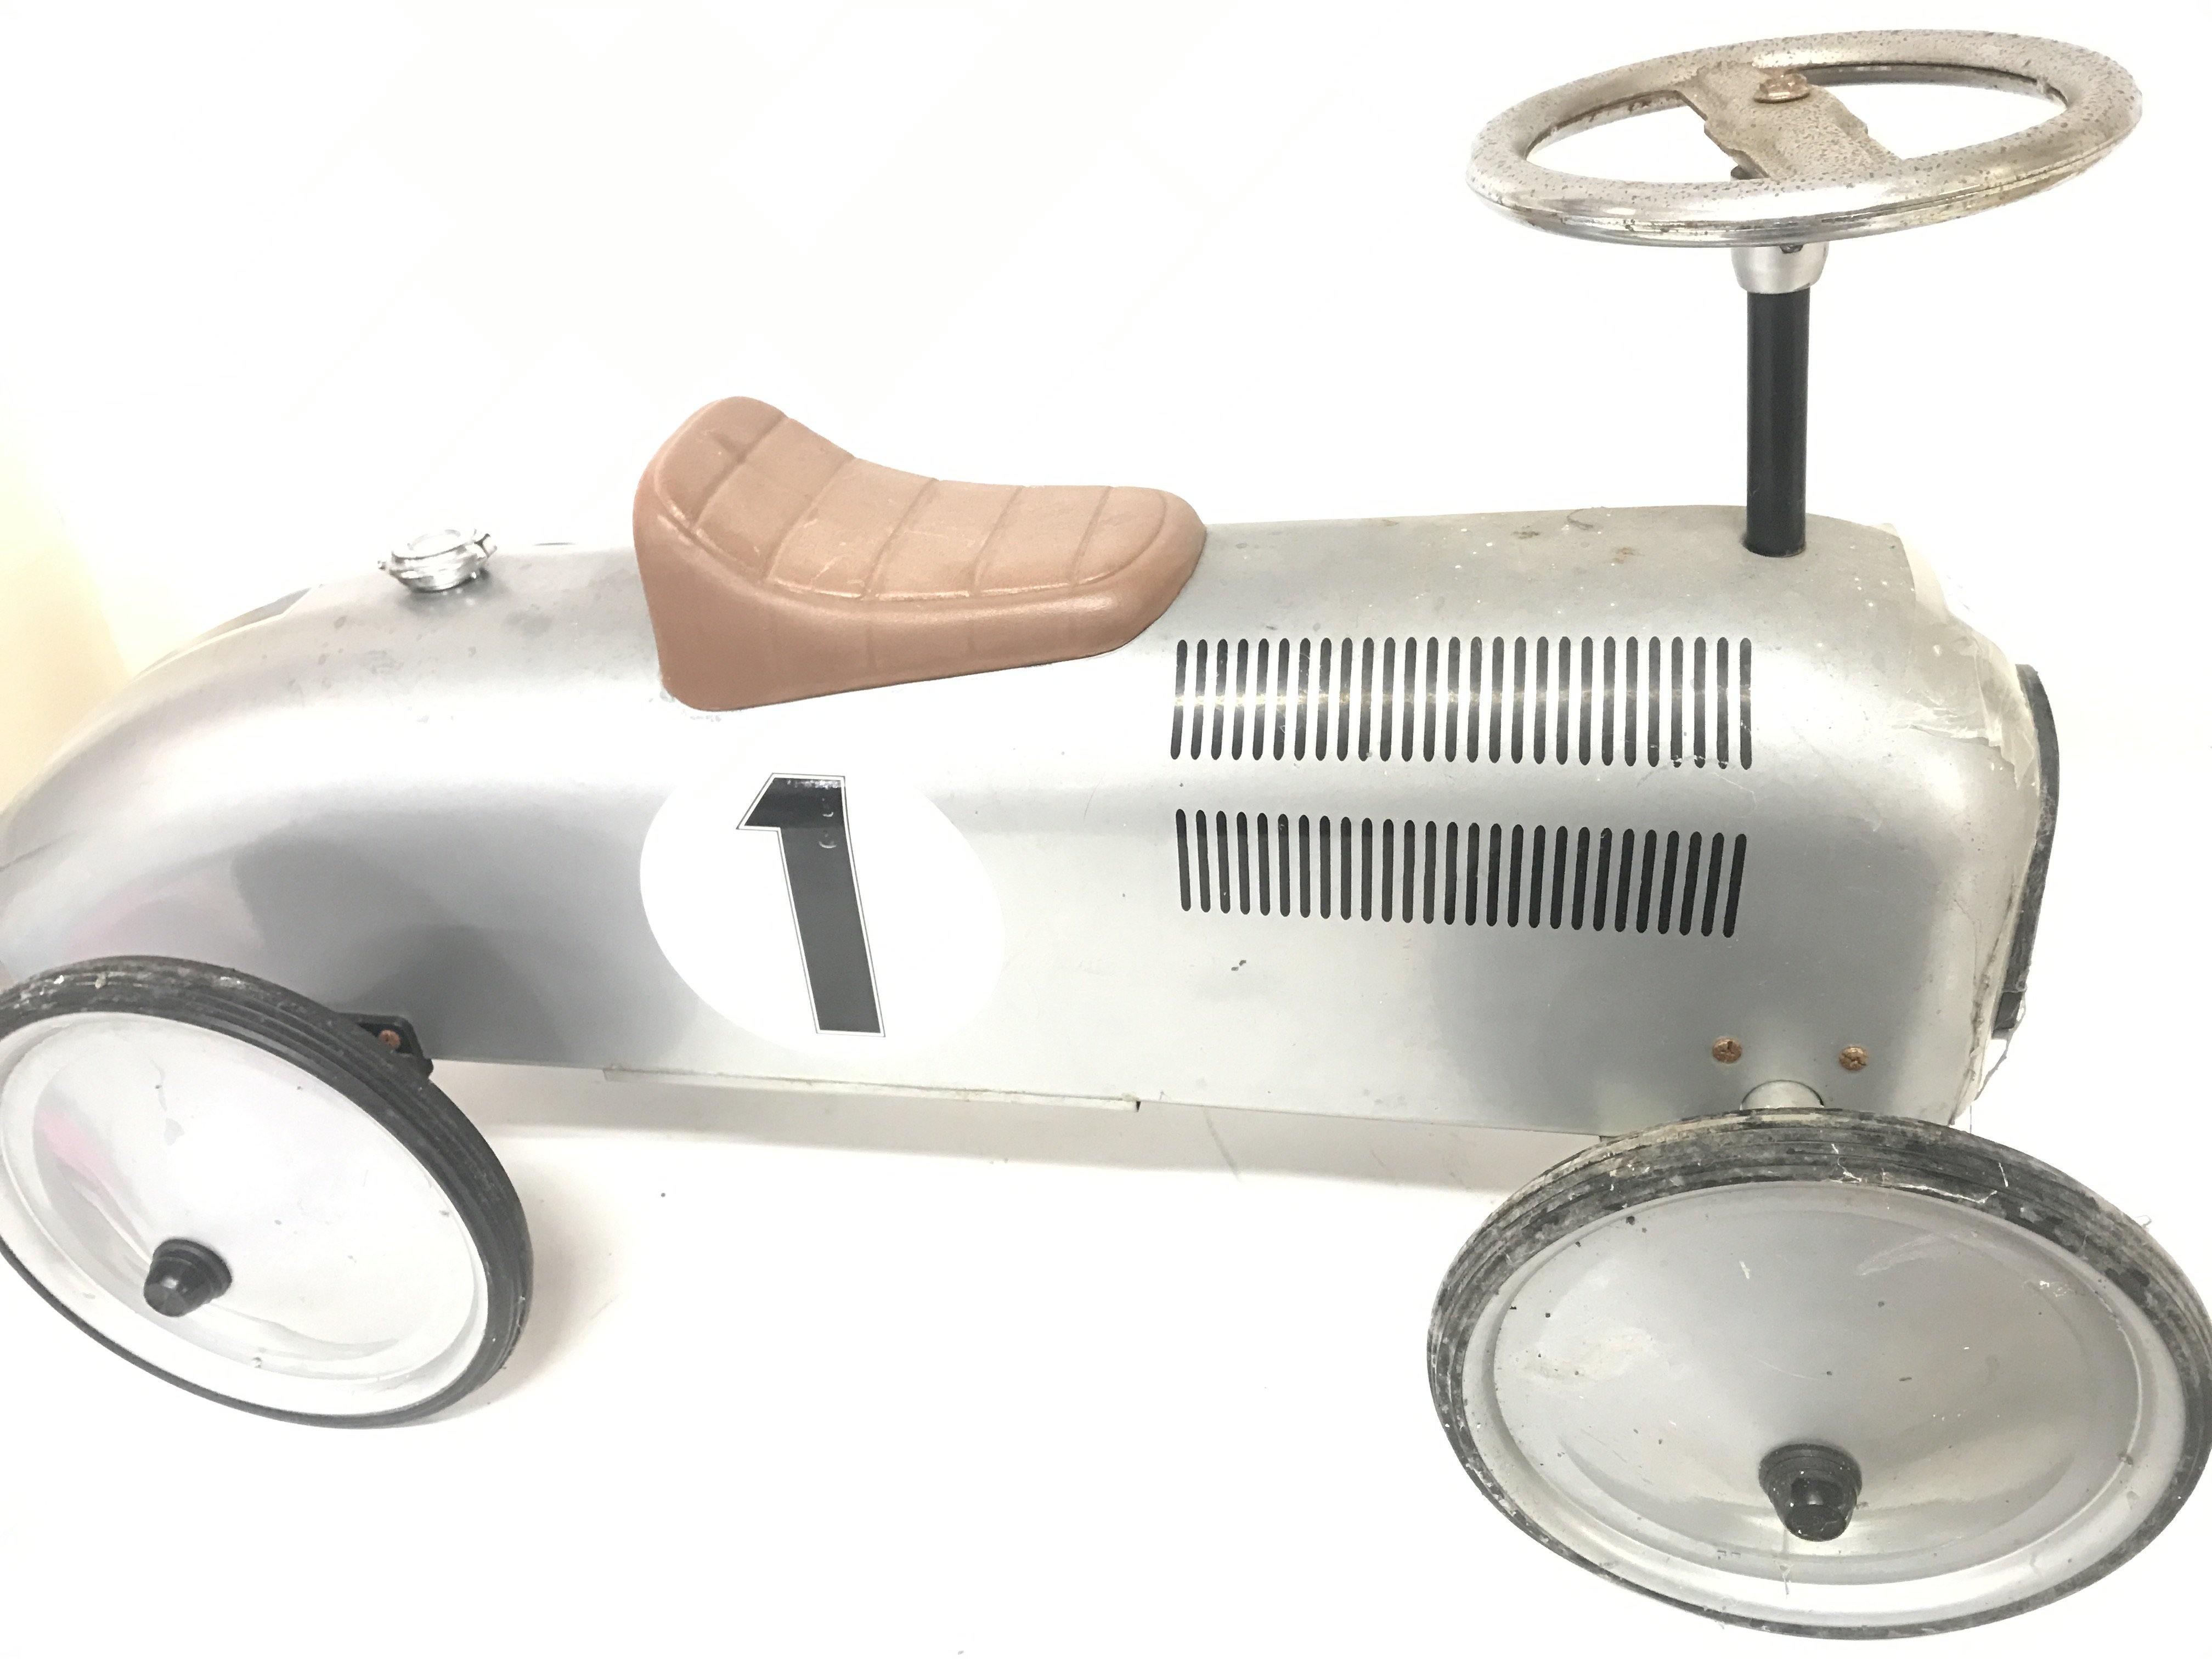 A Child's Metal Toy Pedal Car approx length 76 cm